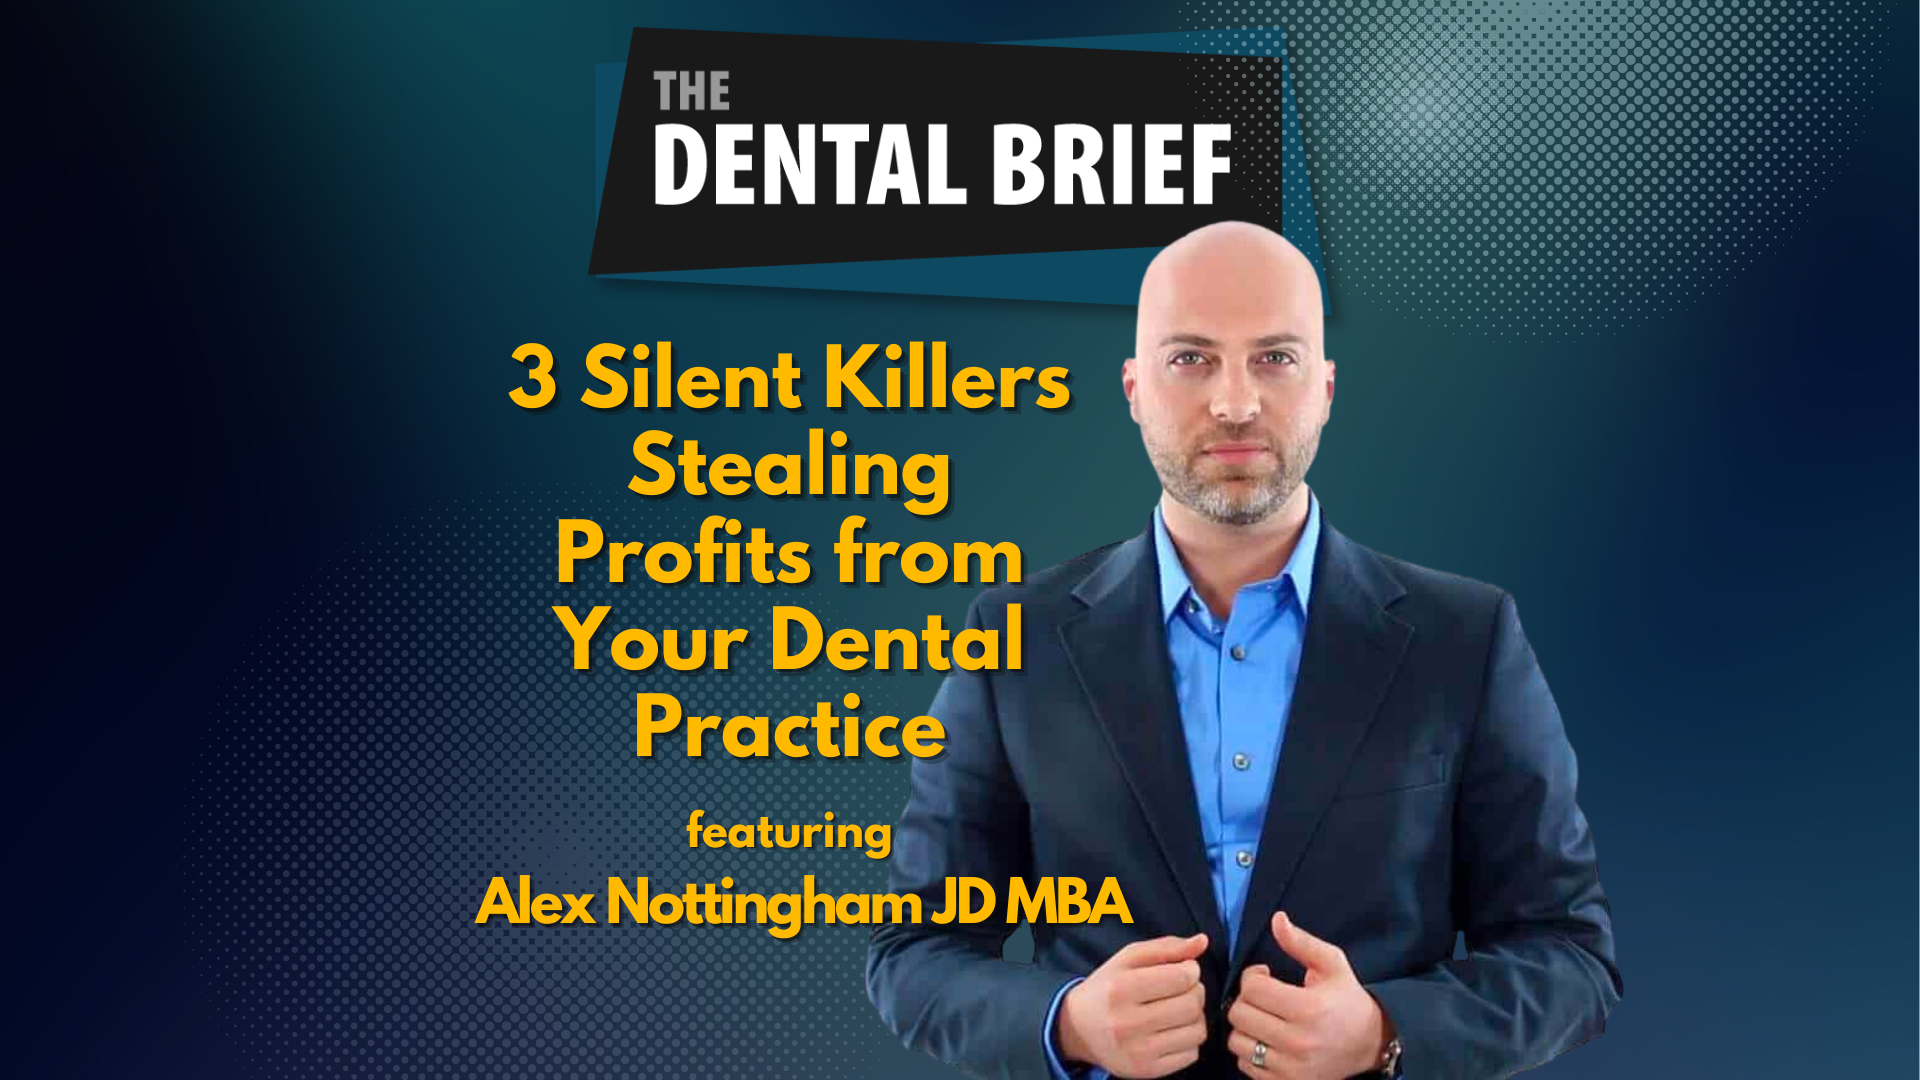 Thumbnail for The dental Brief Podcast featuring Alex Nottingham of All-star dental academy